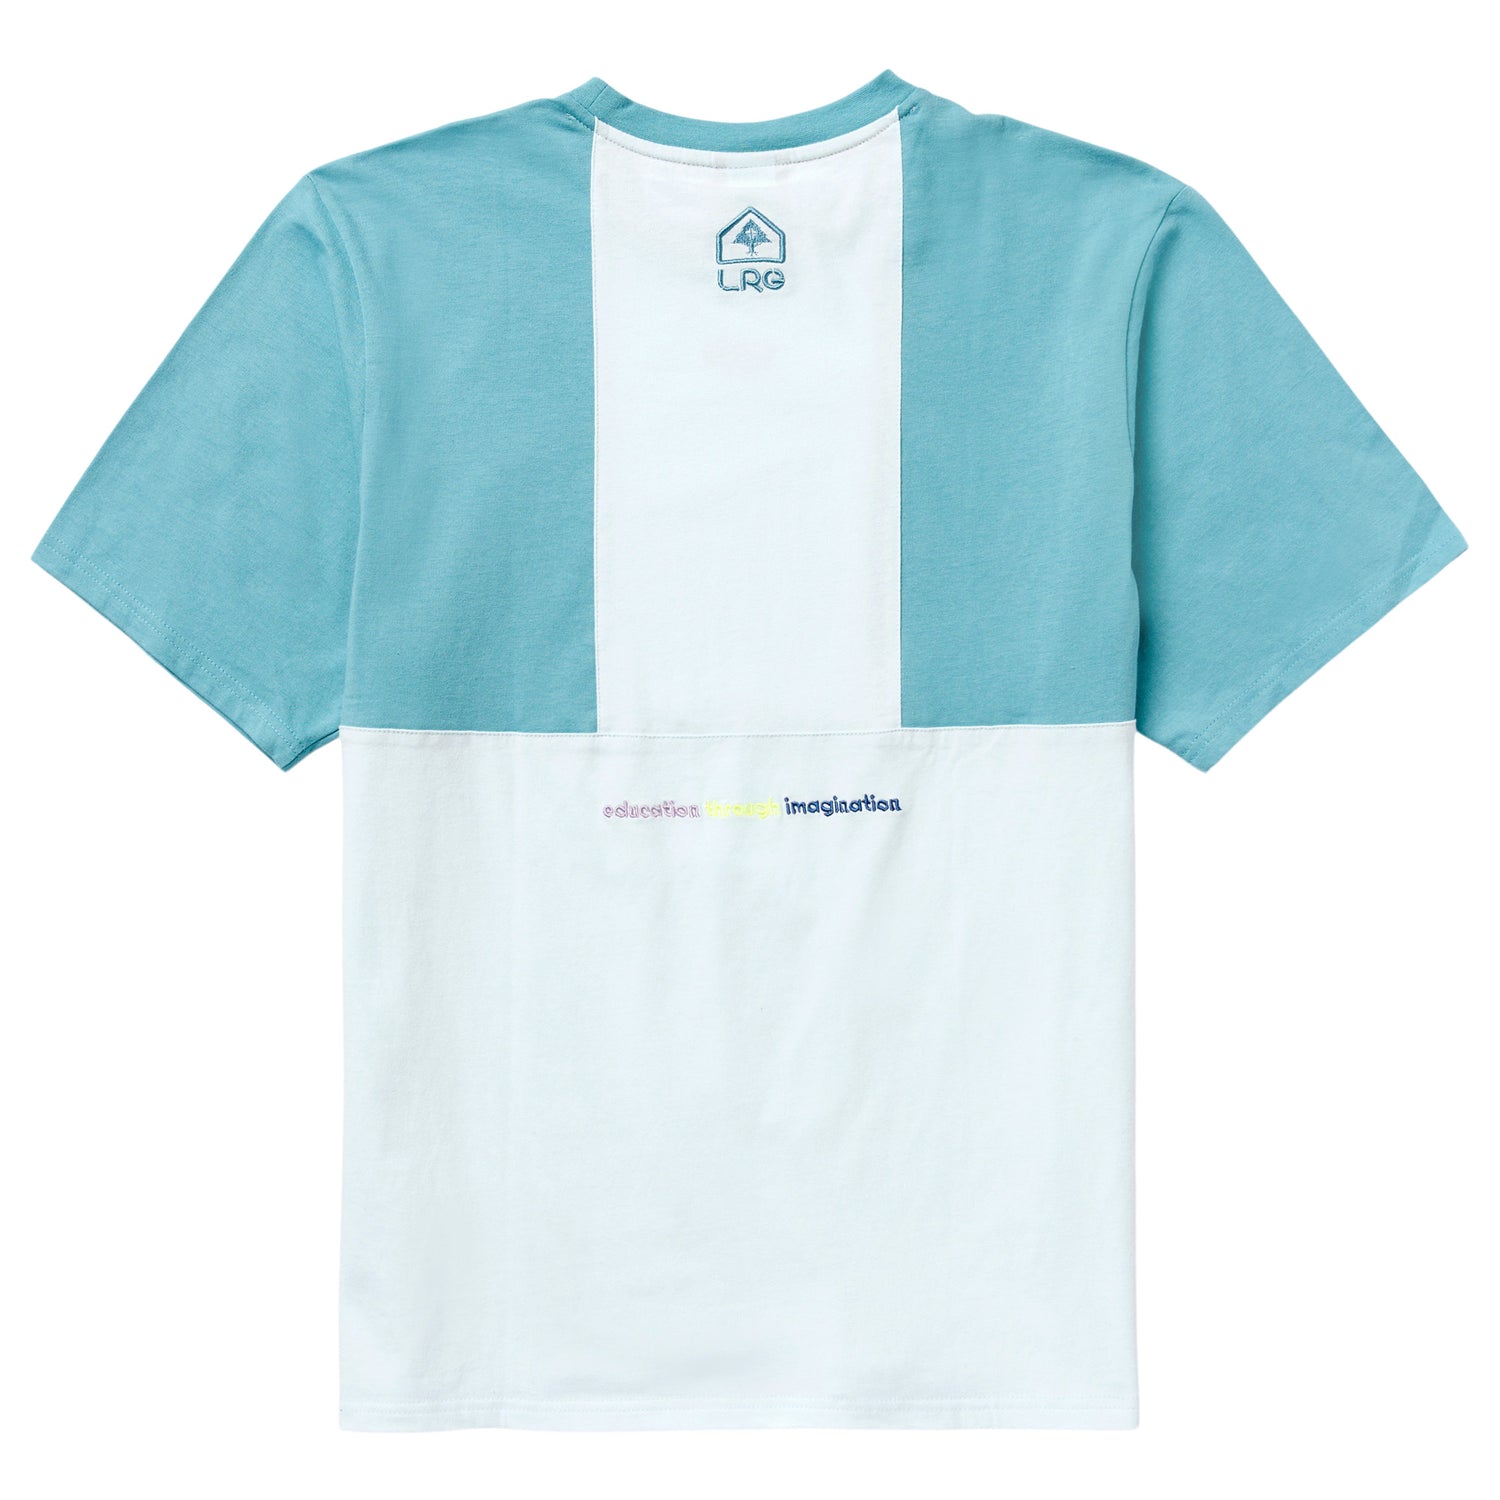 HYPE GROOVE KNIT TEE - BLUE